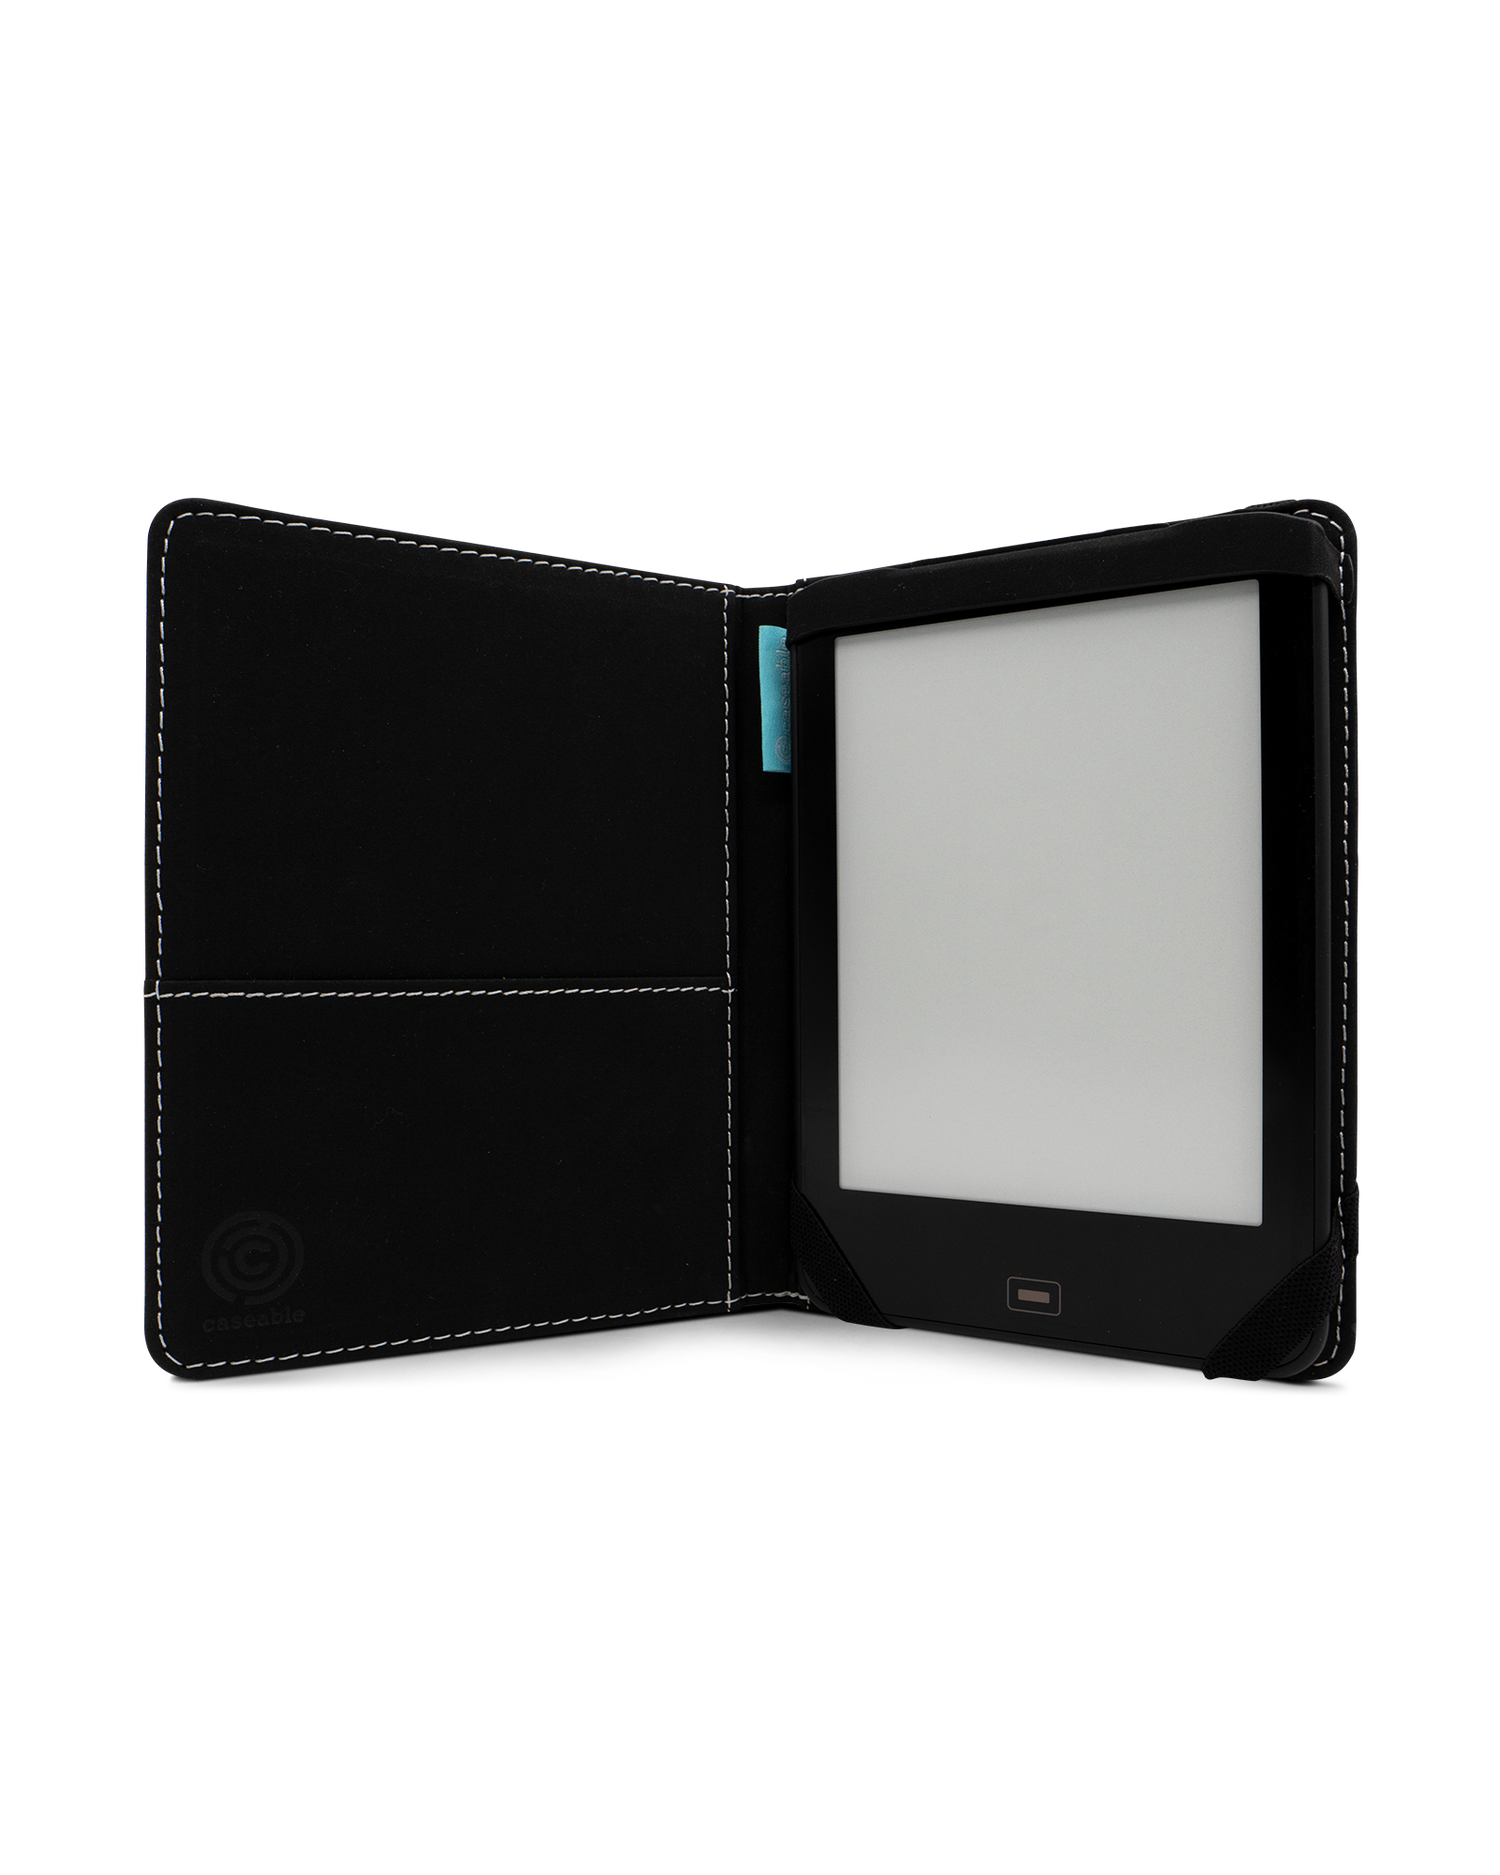 Christian Cross eReader Case for tolino vision 1 to 4 HD: Opened interior view